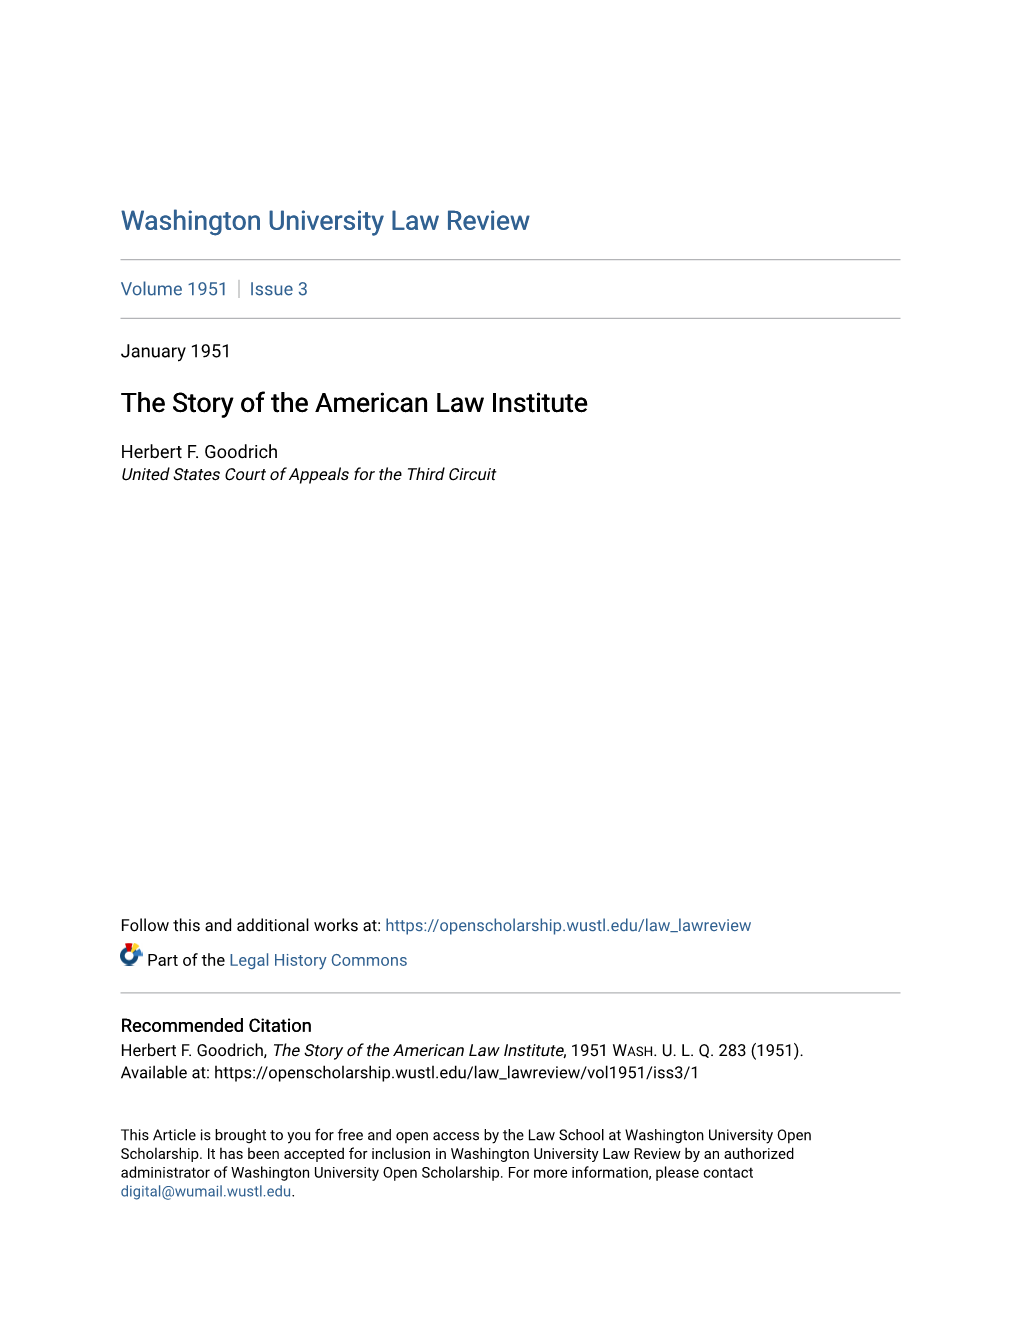 The Story of the American Law Institute